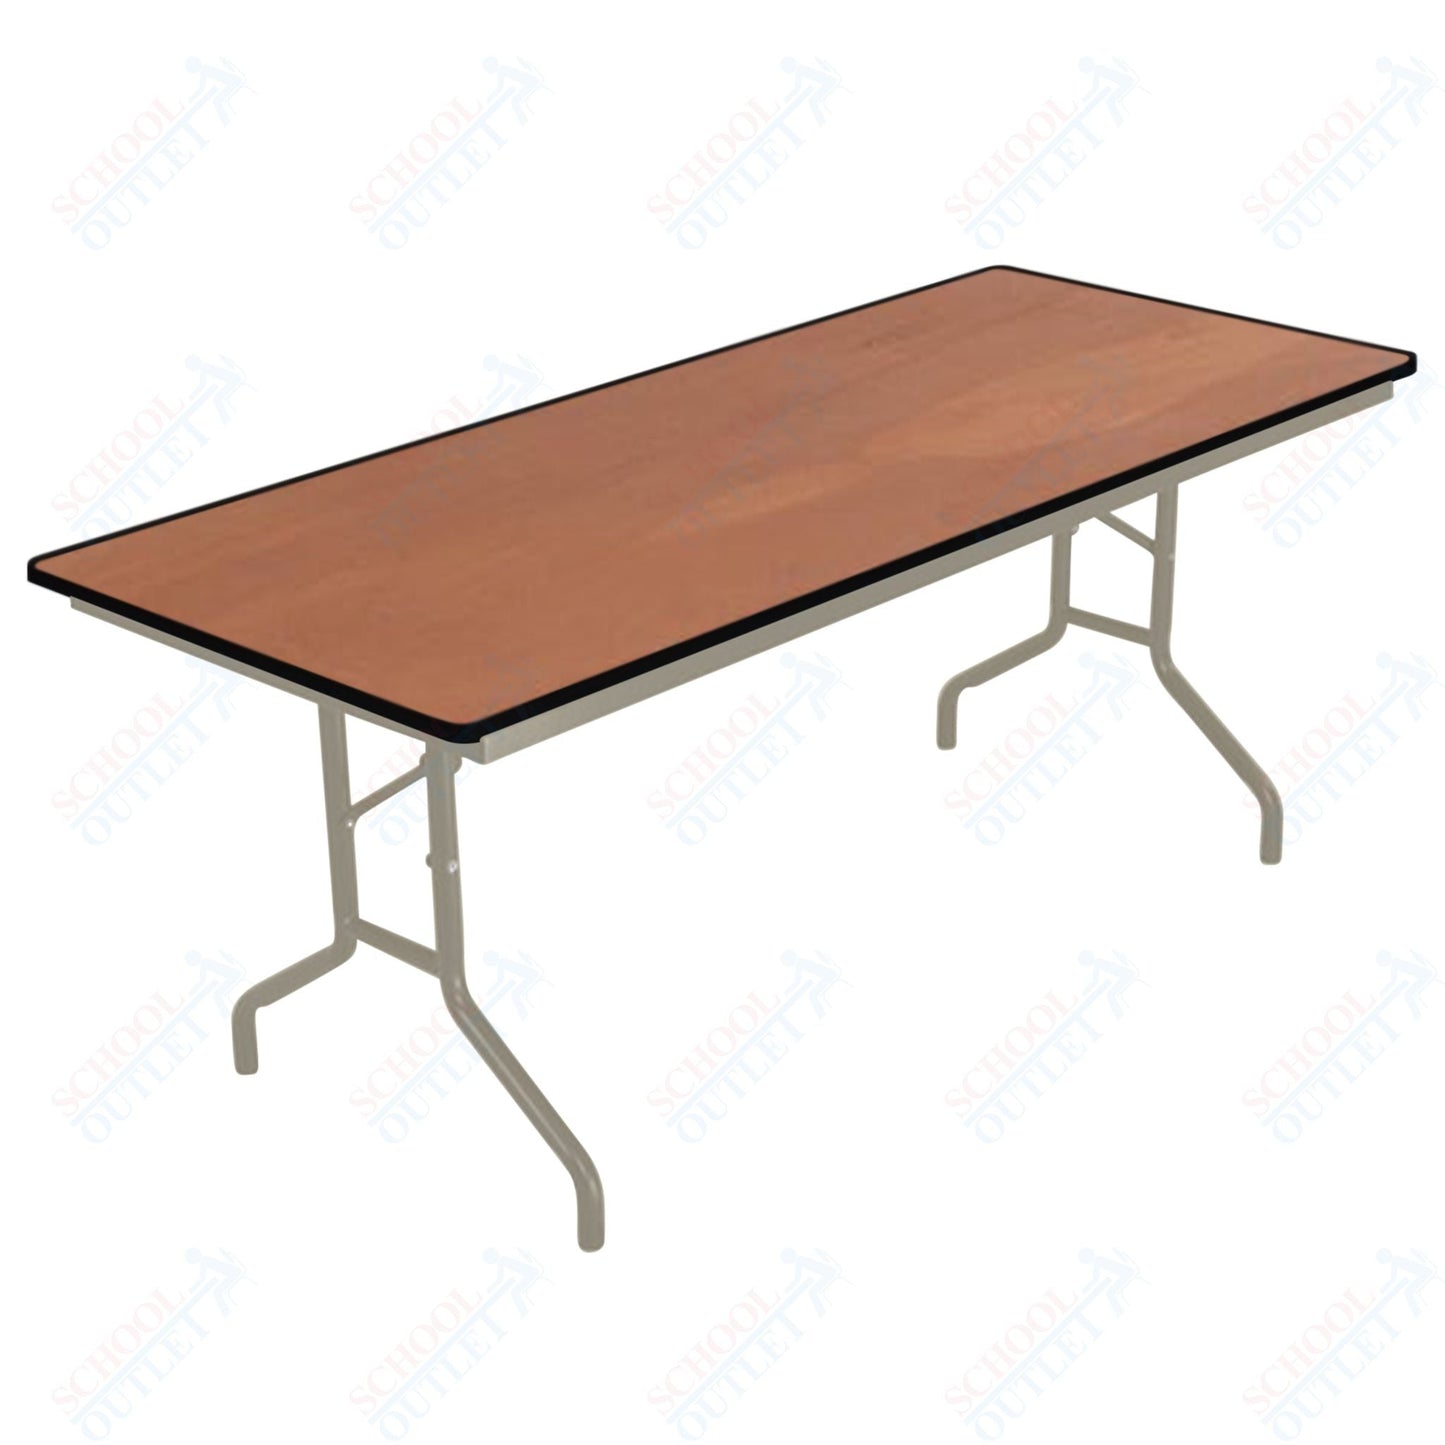 AmTab Folding Table - Plywood Stained and Sealed - Vinyl T - Molding Edge - 18"W x 96"L x 29"H (AmTab AMT - 188PM) - SchoolOutlet